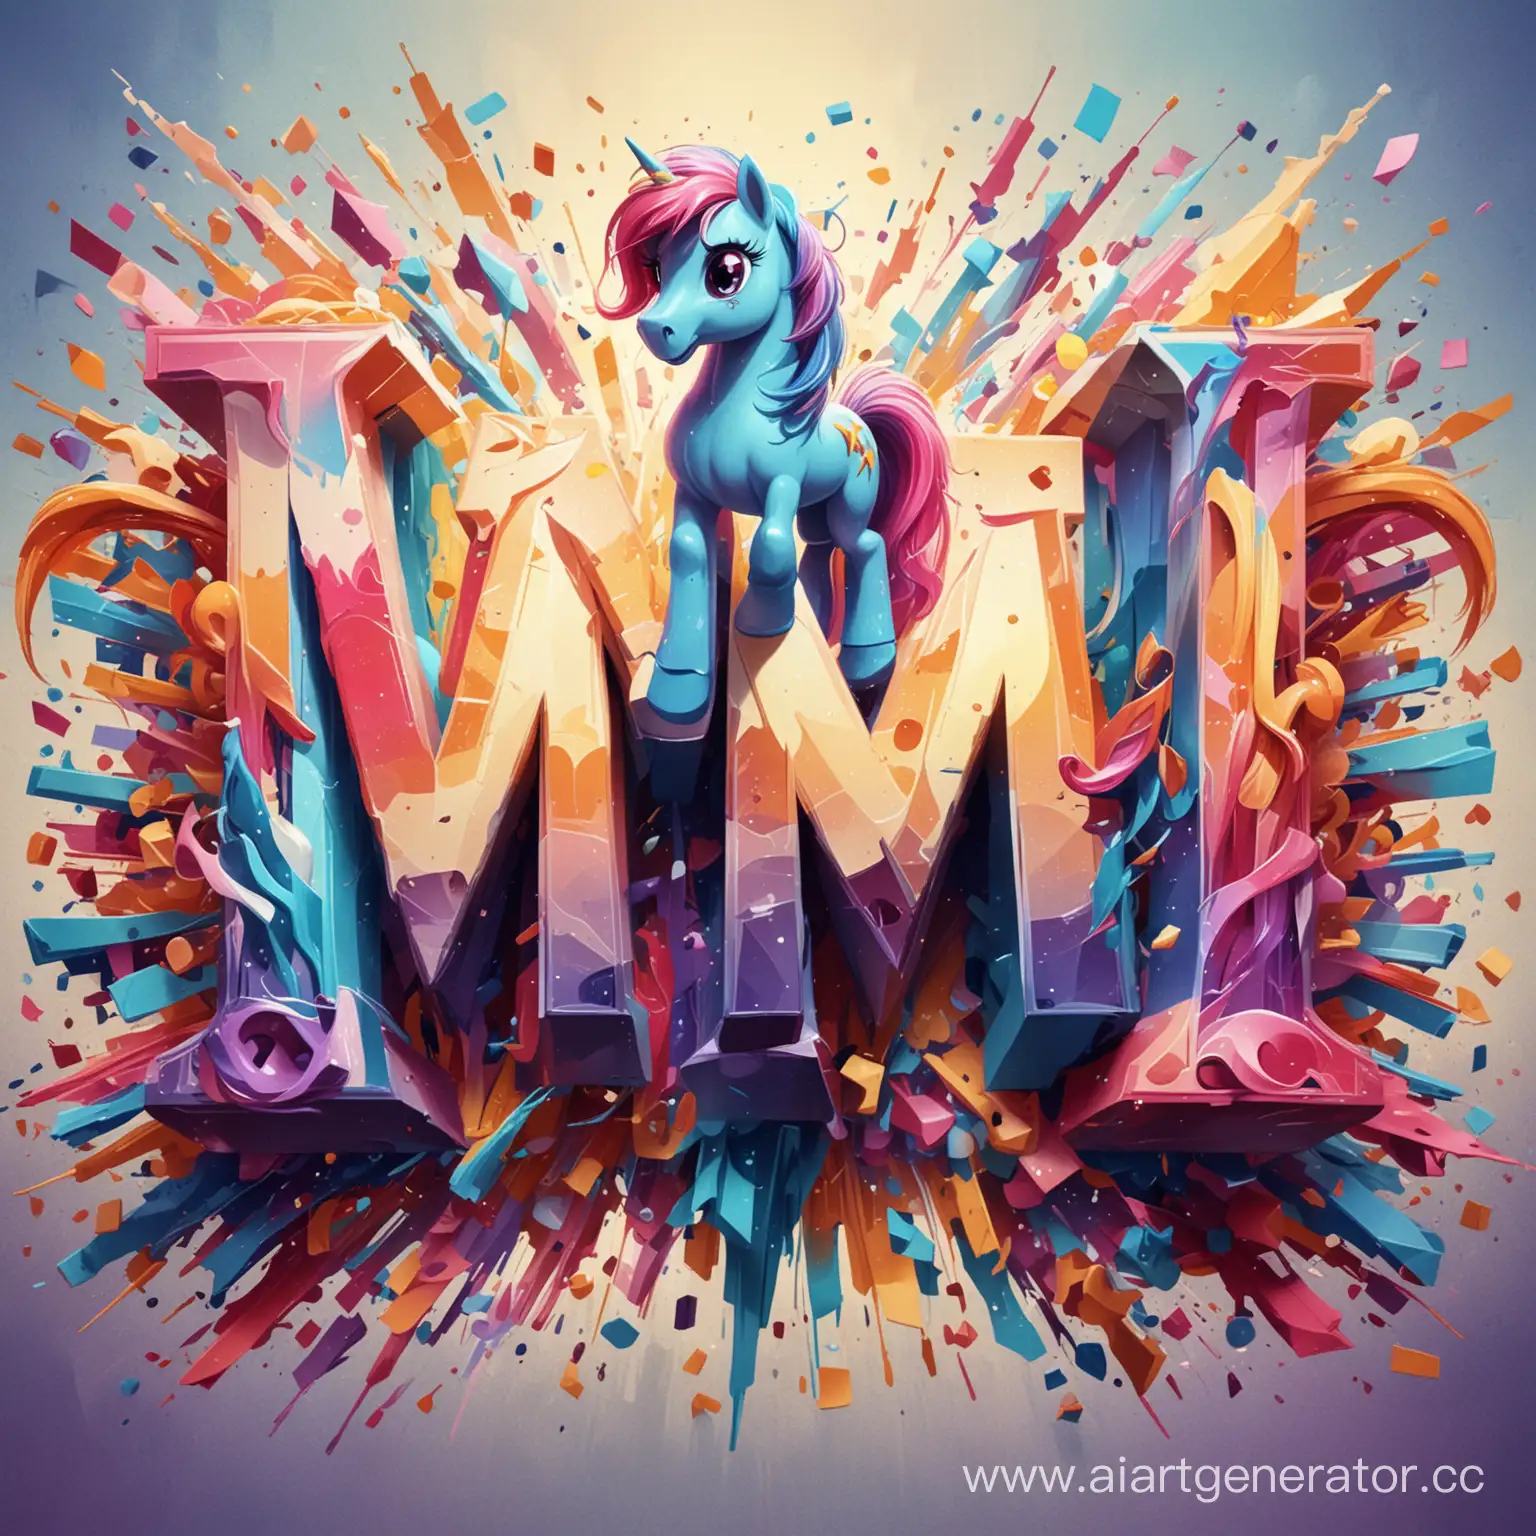 Colorful-MT-Logo-Against-Abstract-My-Little-Pony-Background